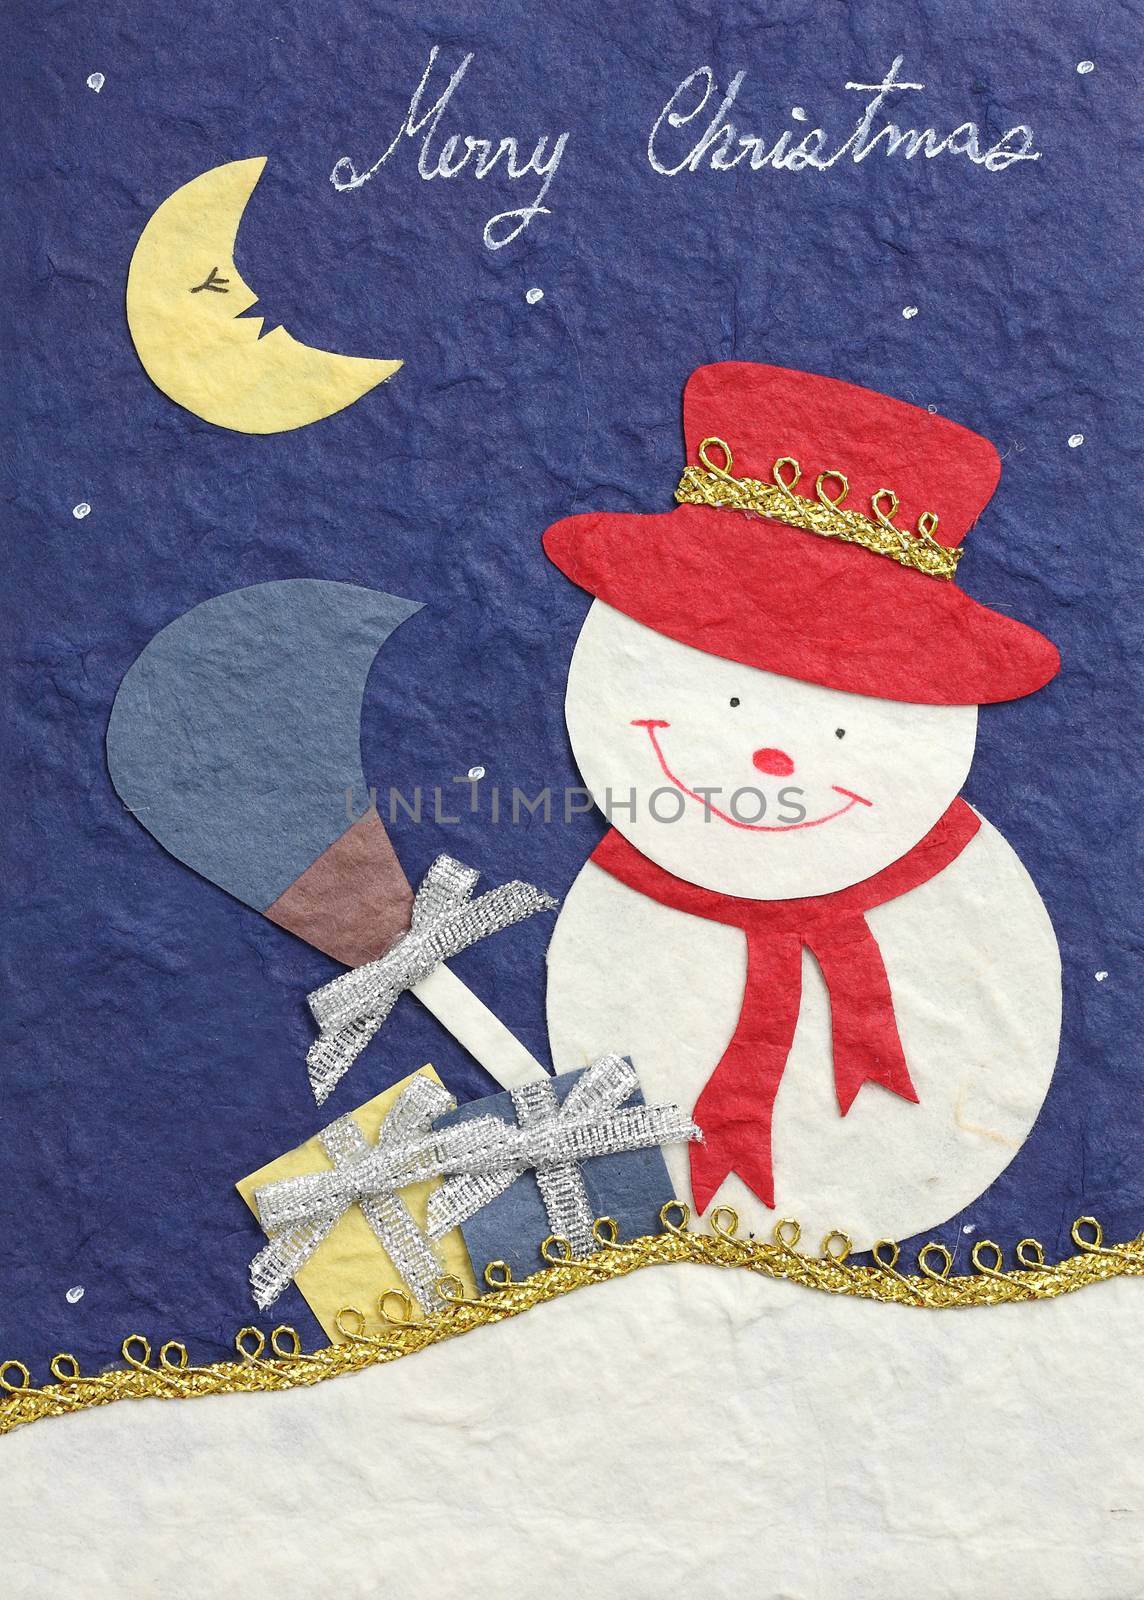 papercraft merry christmas snowman and moon by piyato